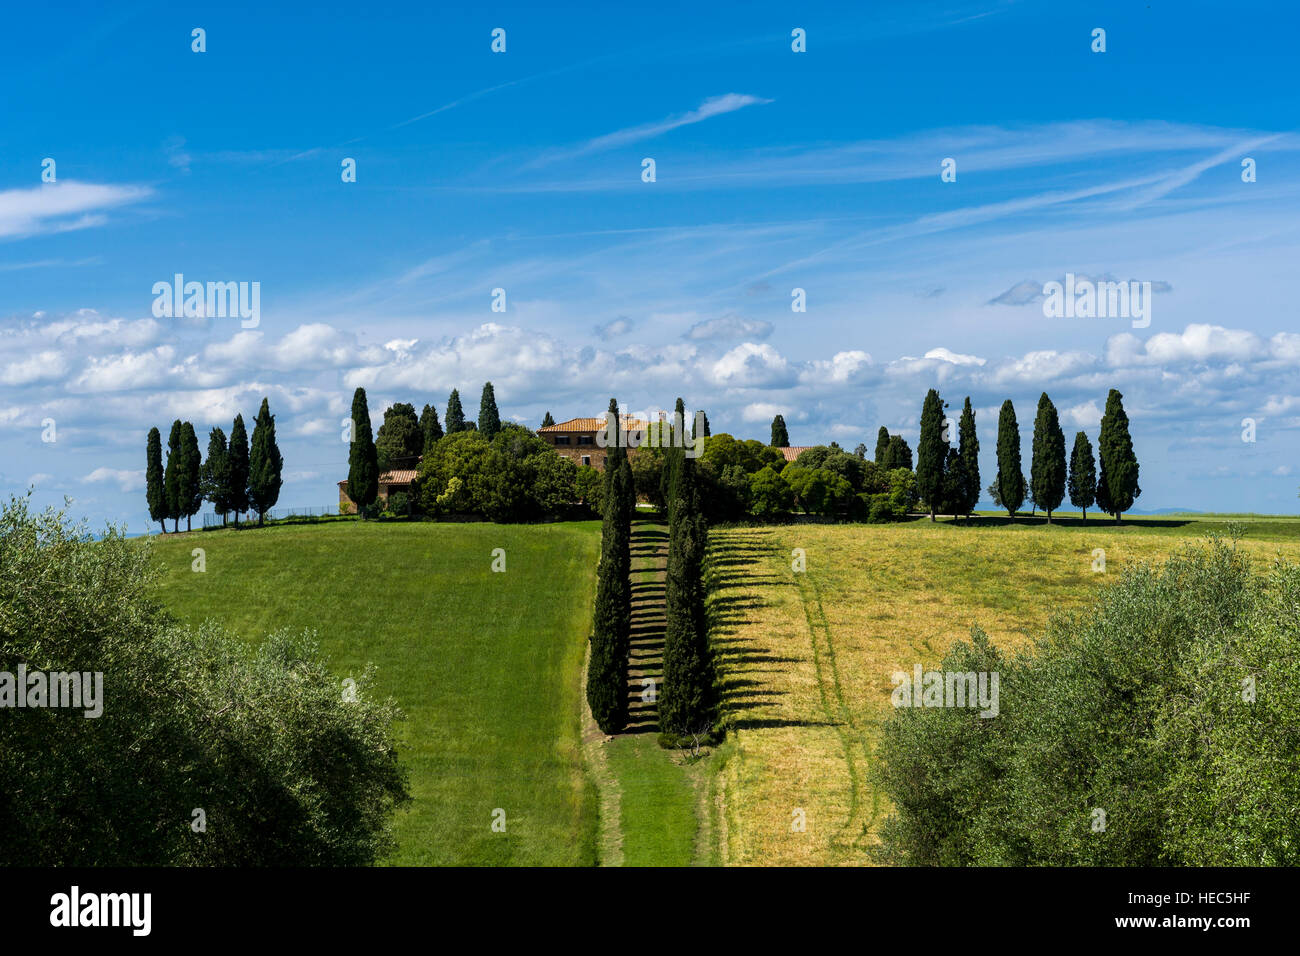 Typical green Tuscany landscape in Val d’Orcia with a farm on a hill, fields, cypresses, olive trees and blue sky Stock Photo